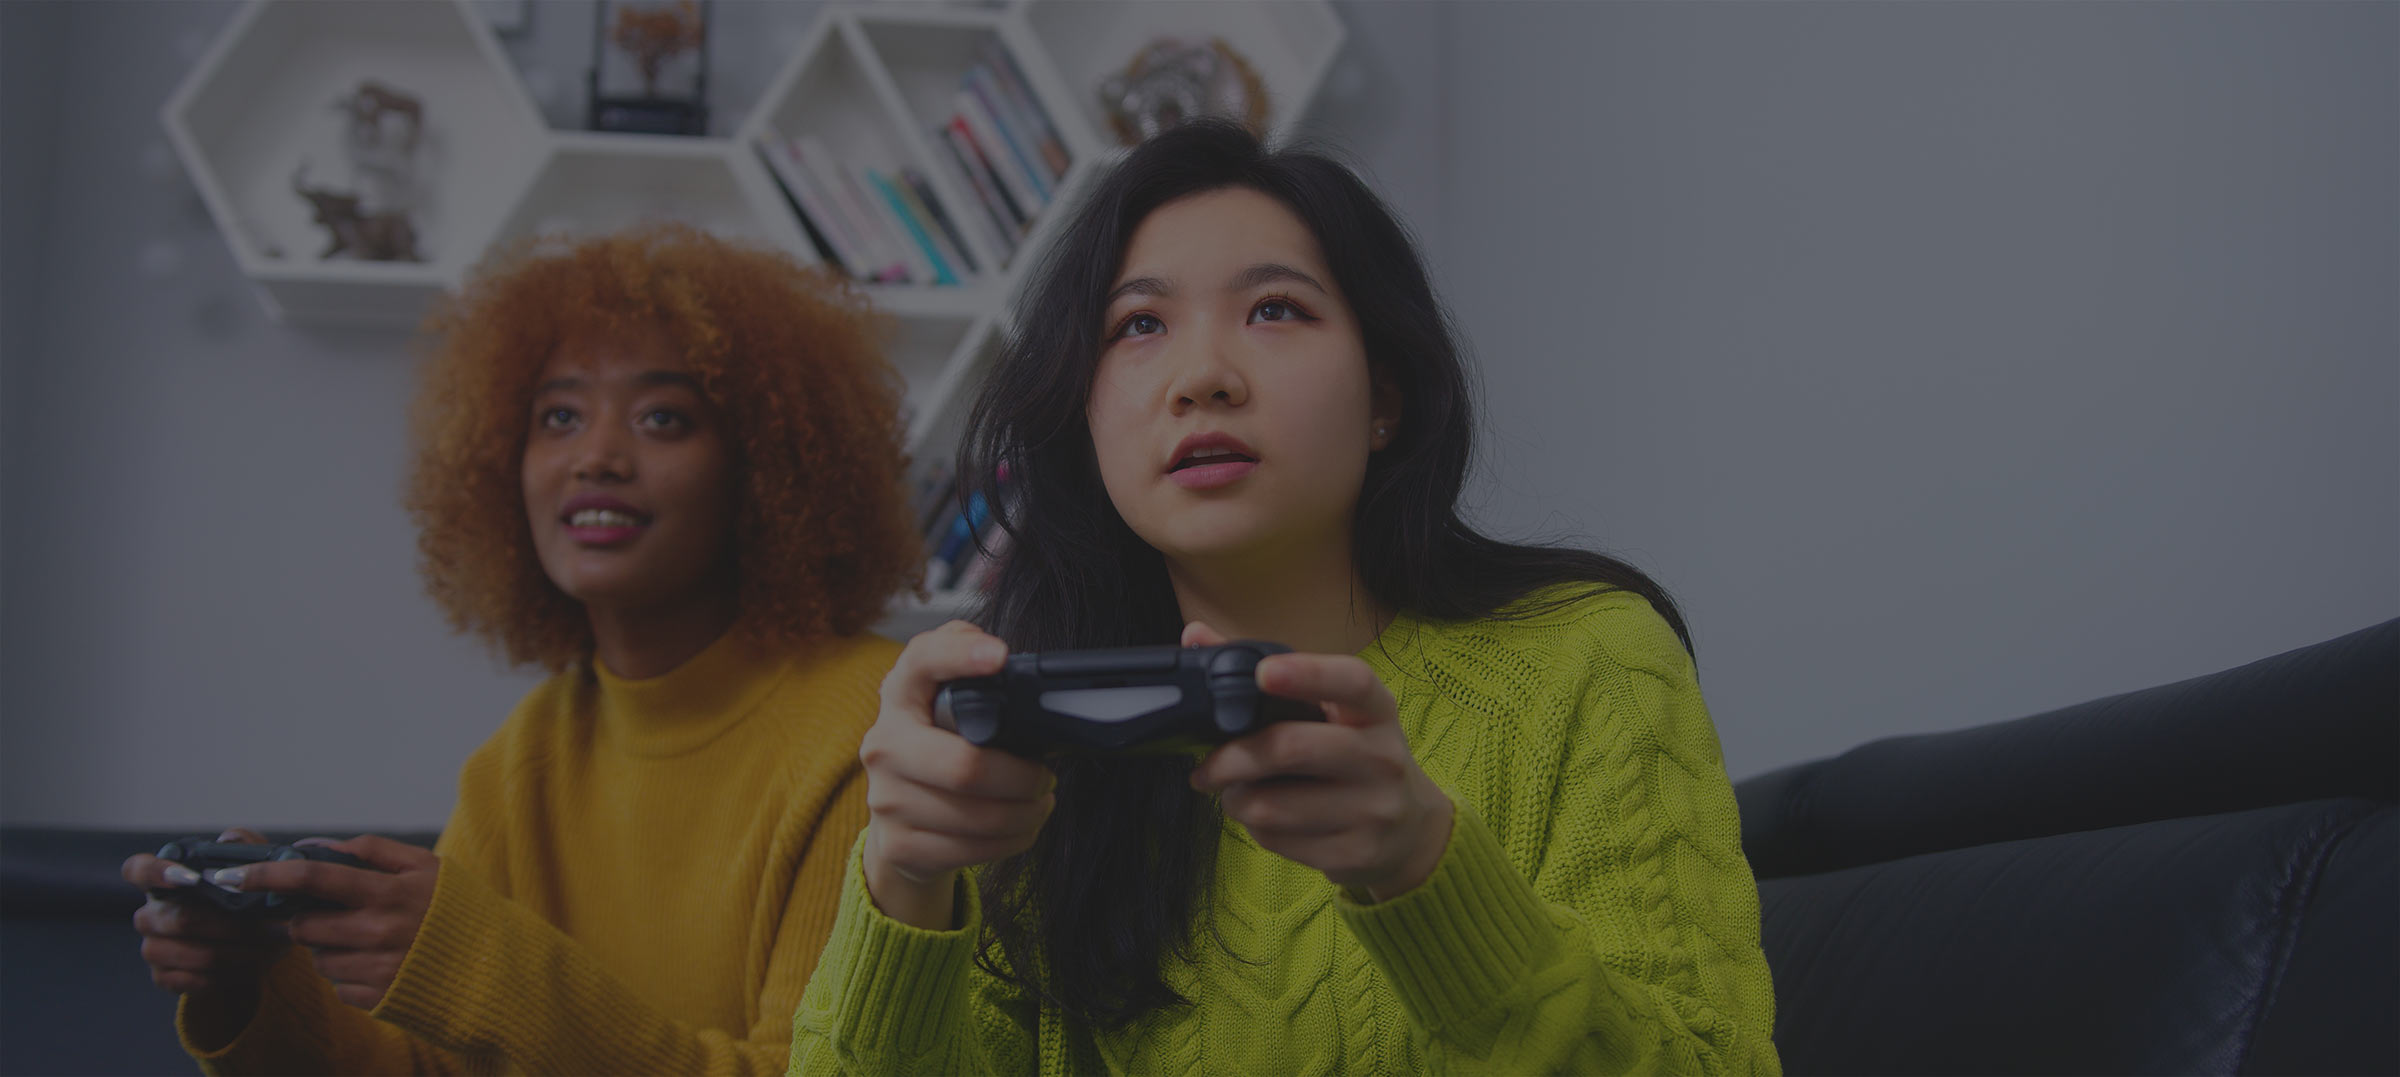 women-in-gaming-report-rival-technologies